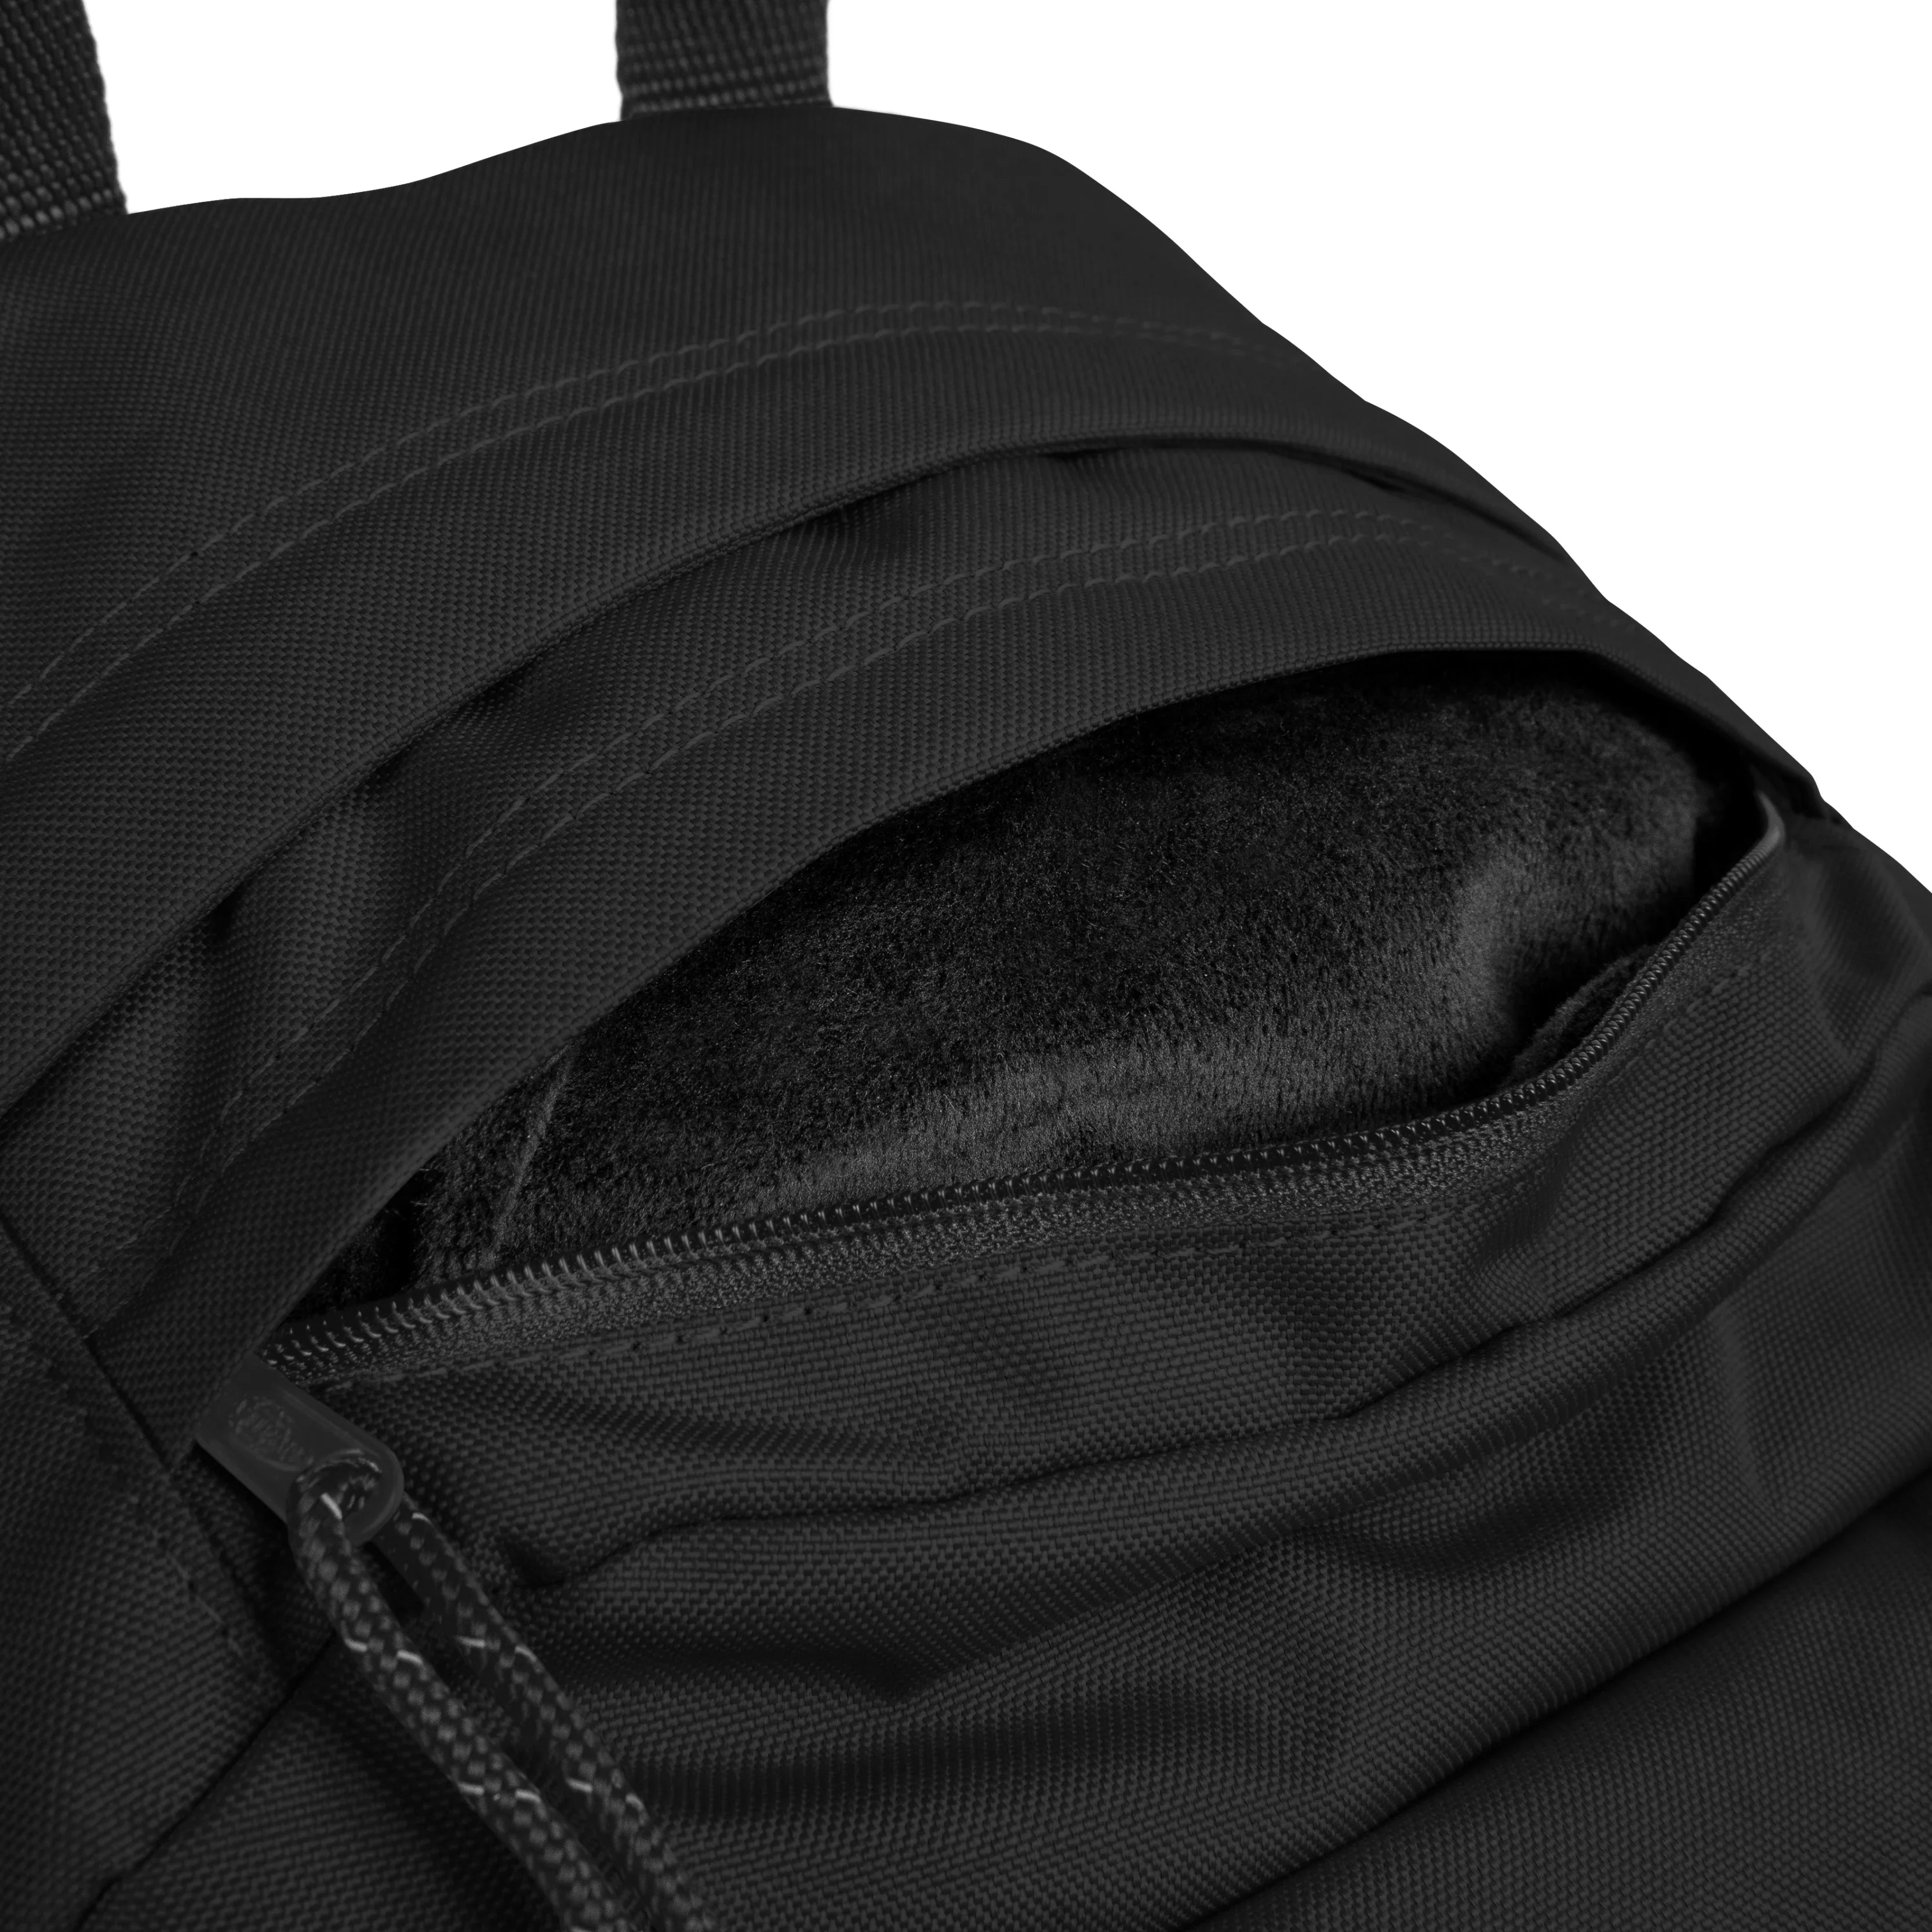 Eastpak Authentic Padded Double Backpack 47 cm - Black